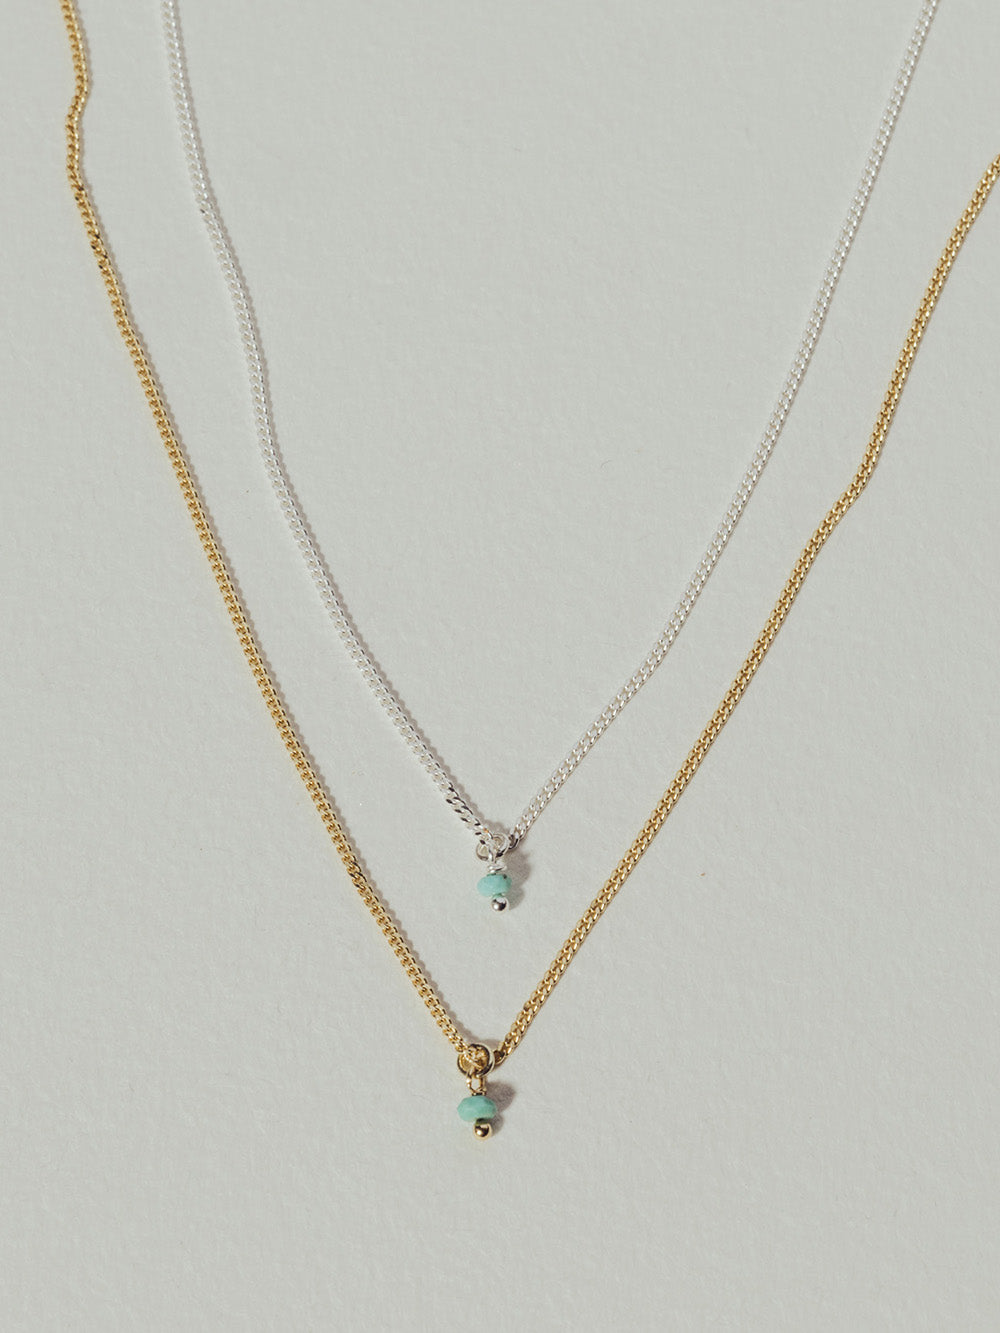 Birthstone December - Turquoise | 14K Gold Plated